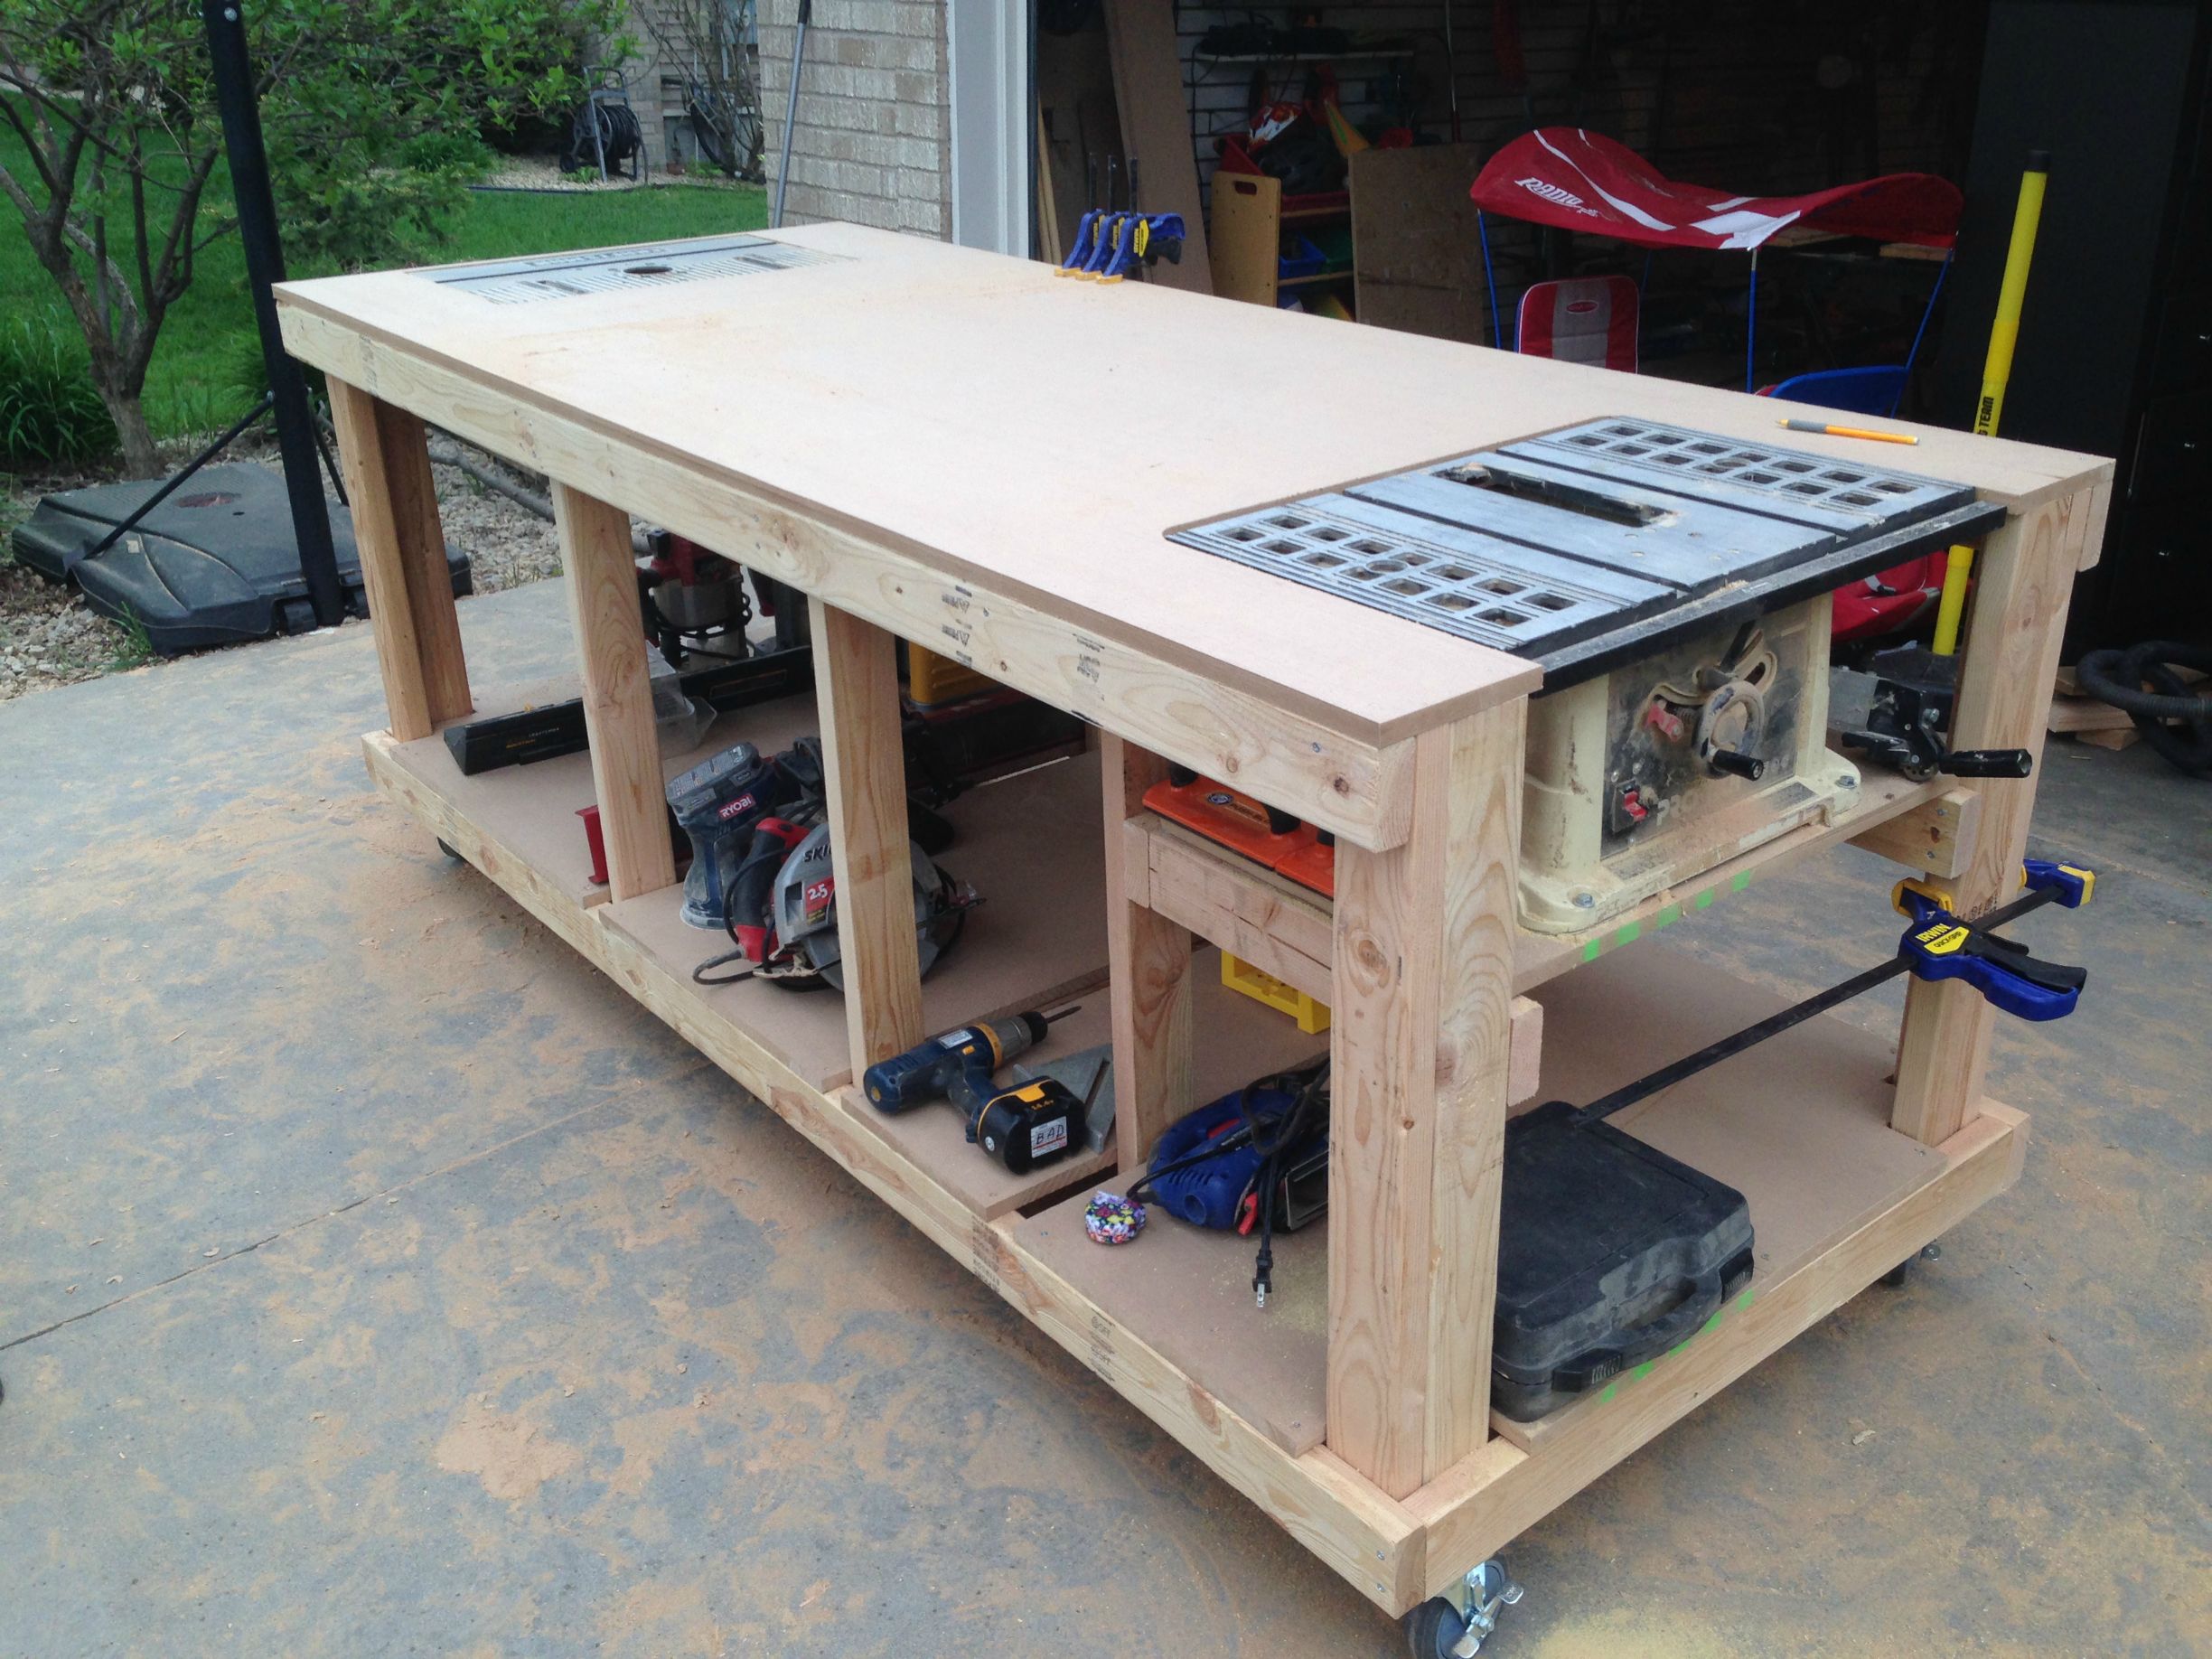 Drill To Make A How To Build A Workbench In Garage Of Garage And